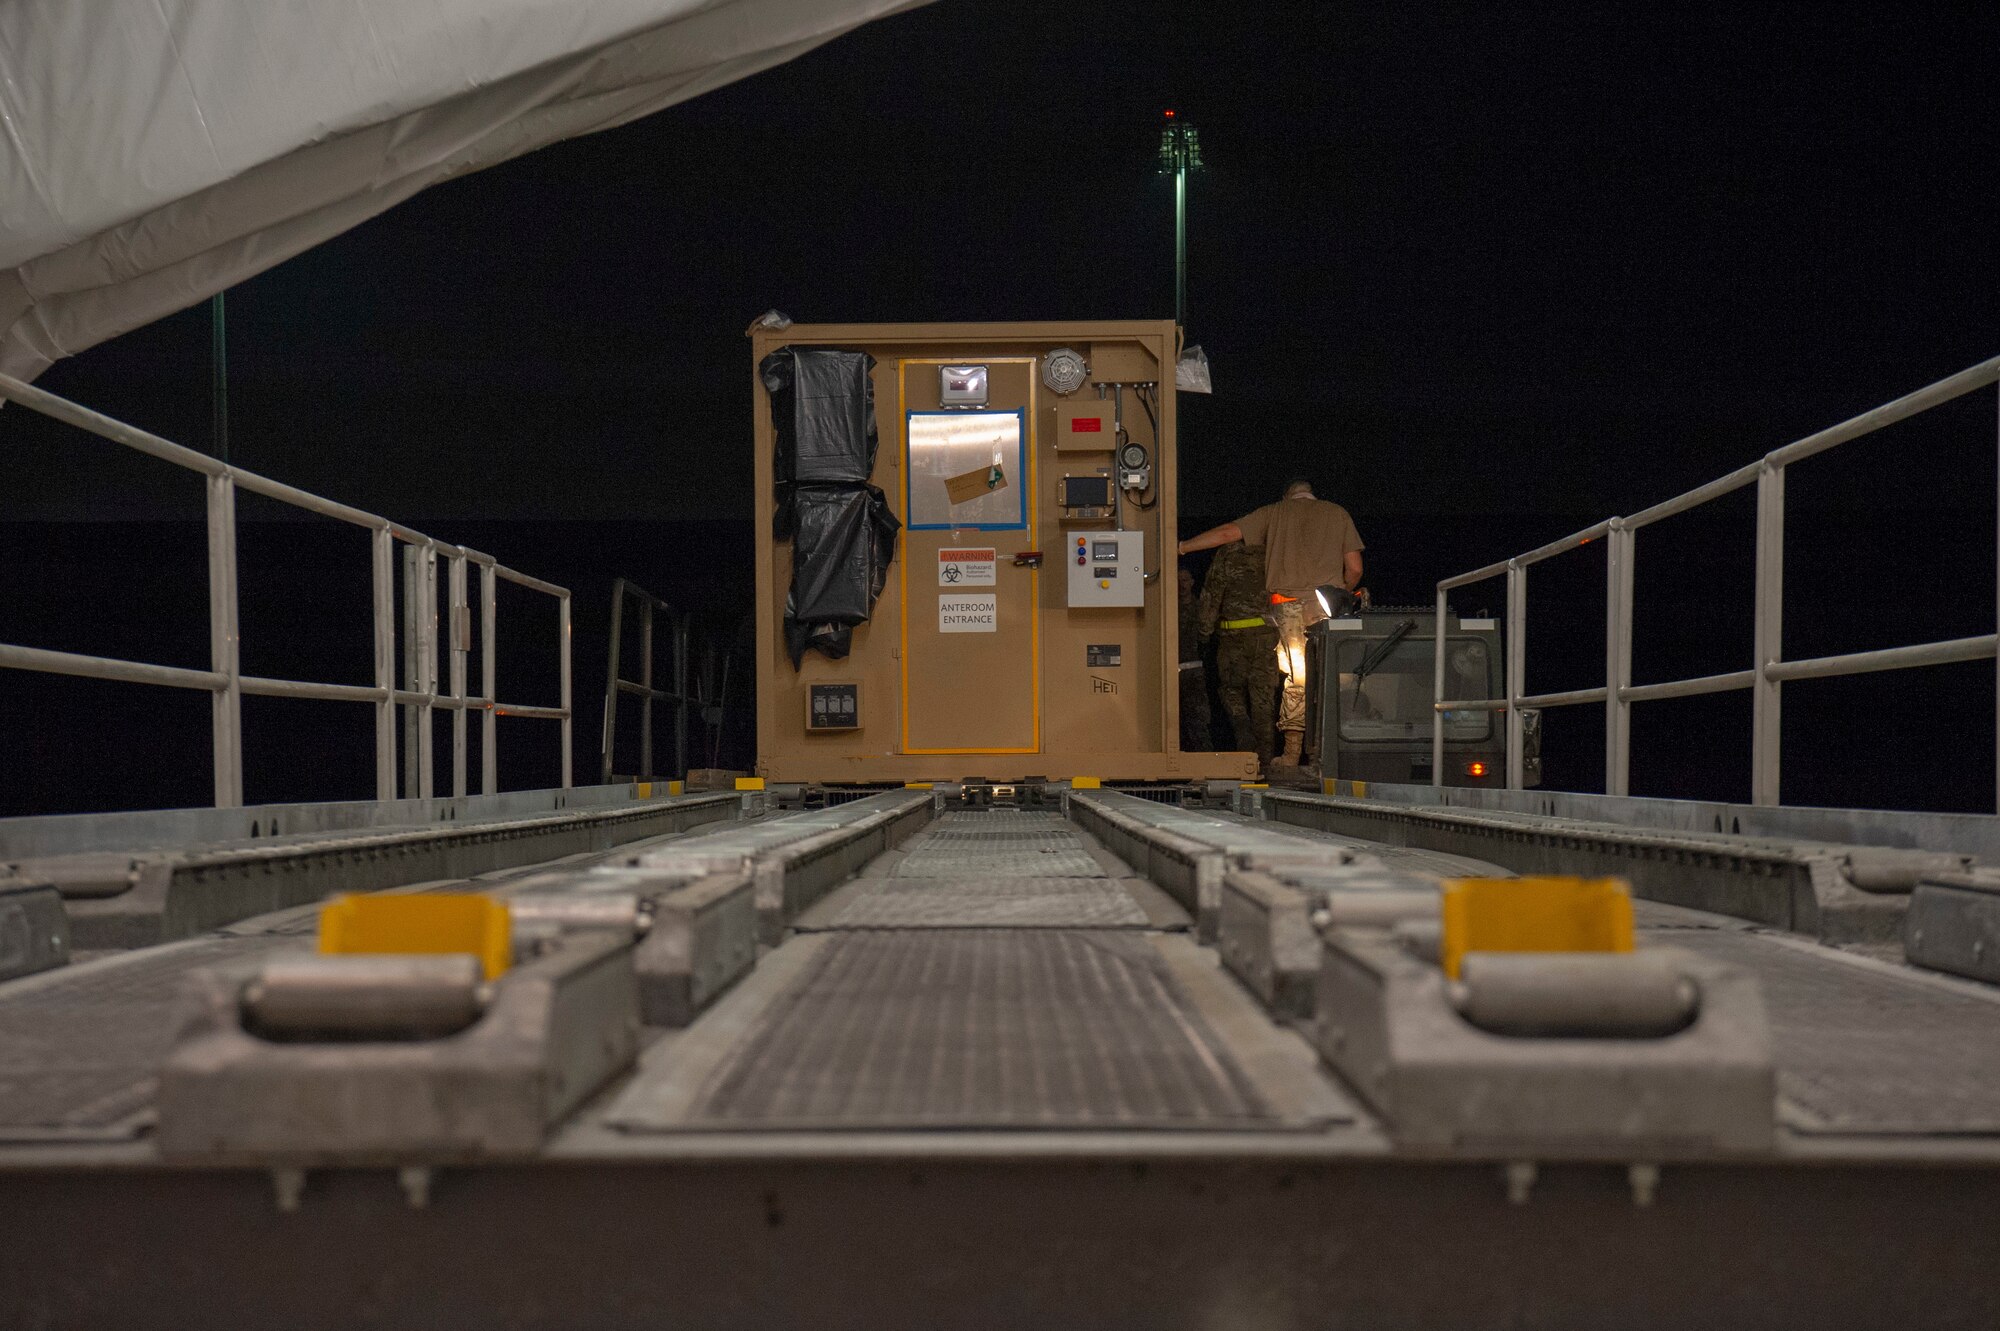 Airmen load a specialized medical container designed to transport individuals with infectious diseases into a clamshell hangar on the flight line of Al Udeid Air Base, Qatar, Sept. 25, 2020. The Negatively Pressurized Conex-Lite, or NPC-L, was received by 379th Expeditionary Aeromedical Evacuation Squadron shortly after the Negatively Pressurized Conex, or NPC. Both medical containers will enable the 379th EAES to safely and expeditiously transport personnel with COVID-19, or other infectious diseases, to higher echelons of care from military installations where isolation or treatment may not be available.